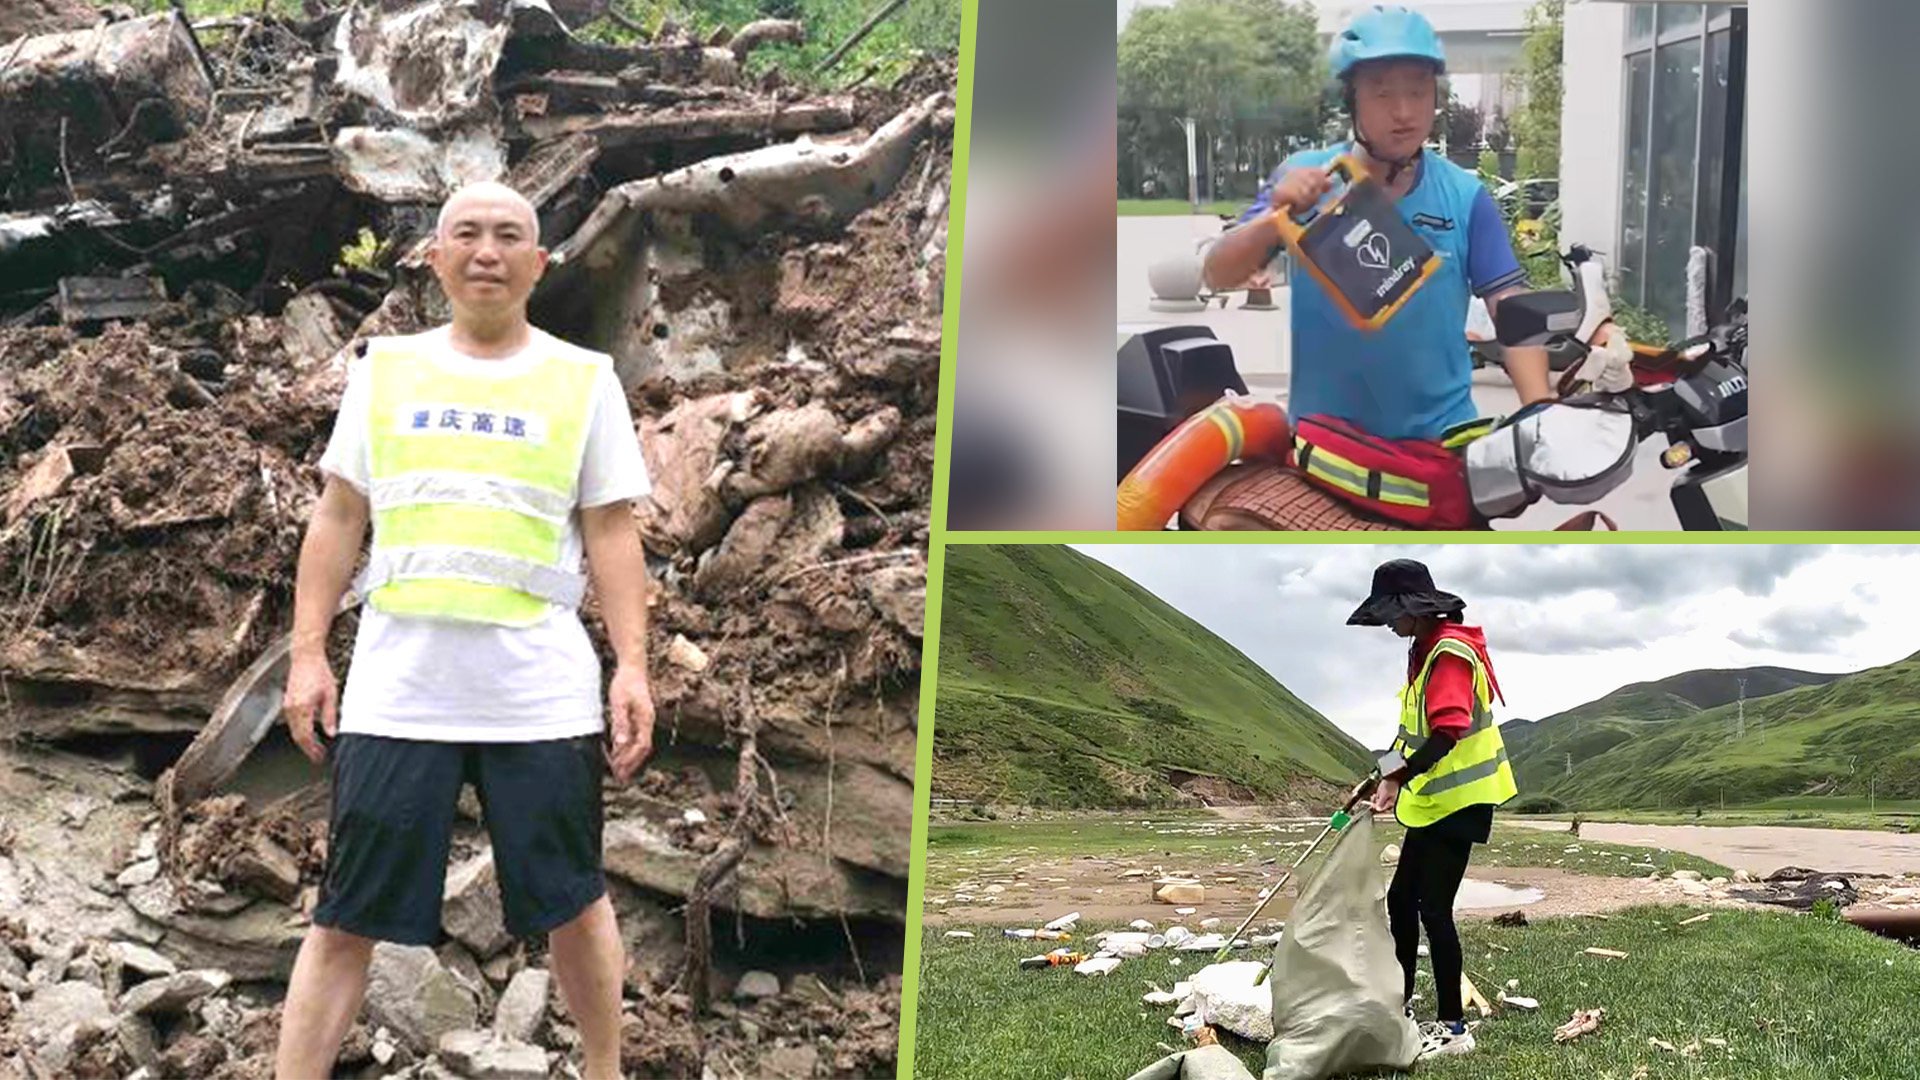 The Post takes a look at some Good Samaritan-themed stories that have come out of China in recent days. Photo: SCMP composite/Douyin/Sina
